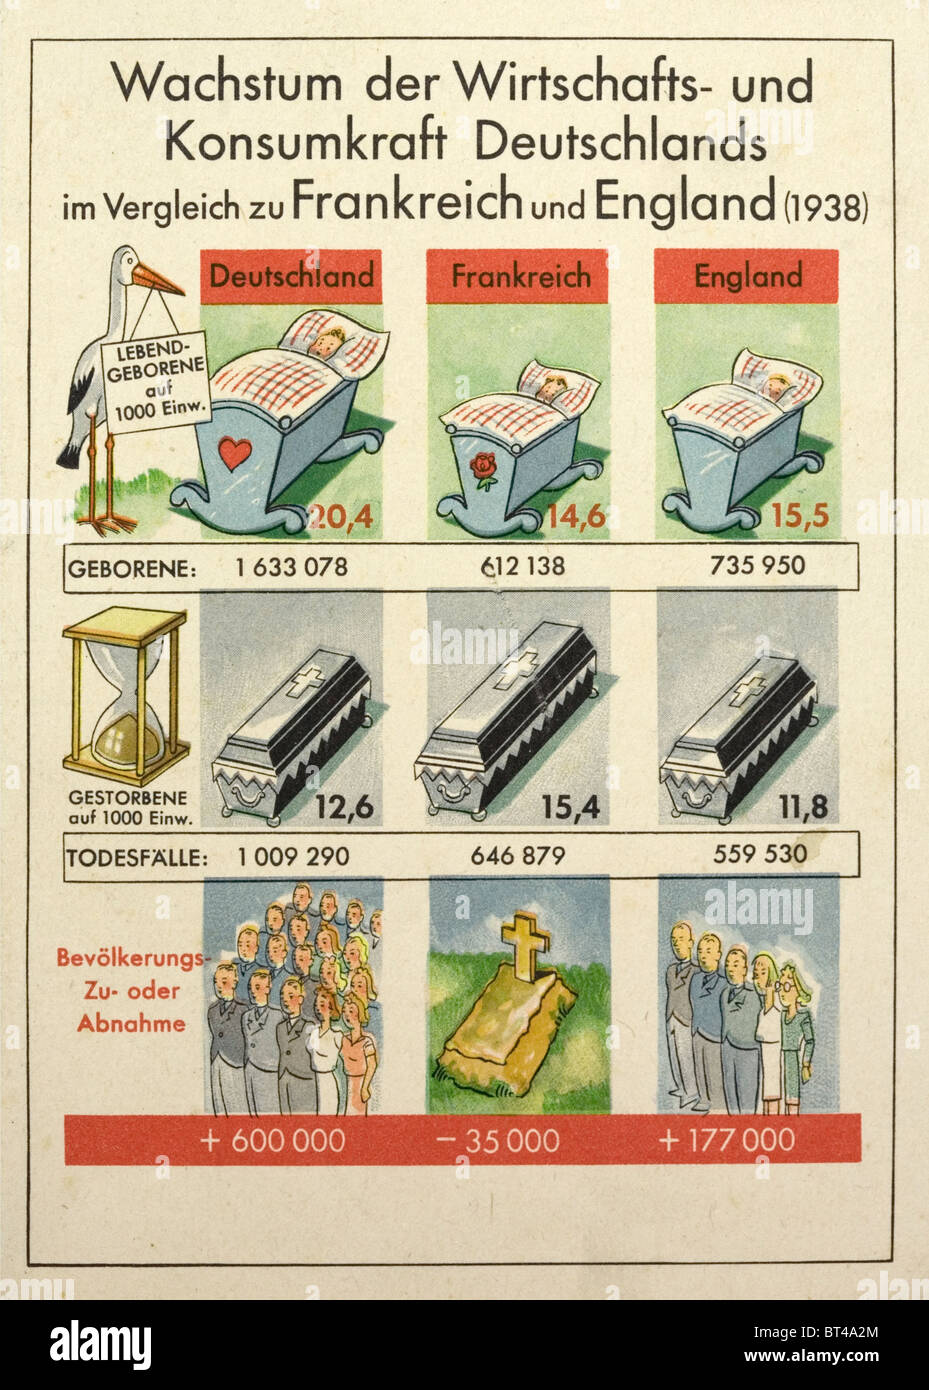 German Nazi propaganda card comparing the birth and death rates in Germany, France and England. A justification for Lebensraum. Stock Photo